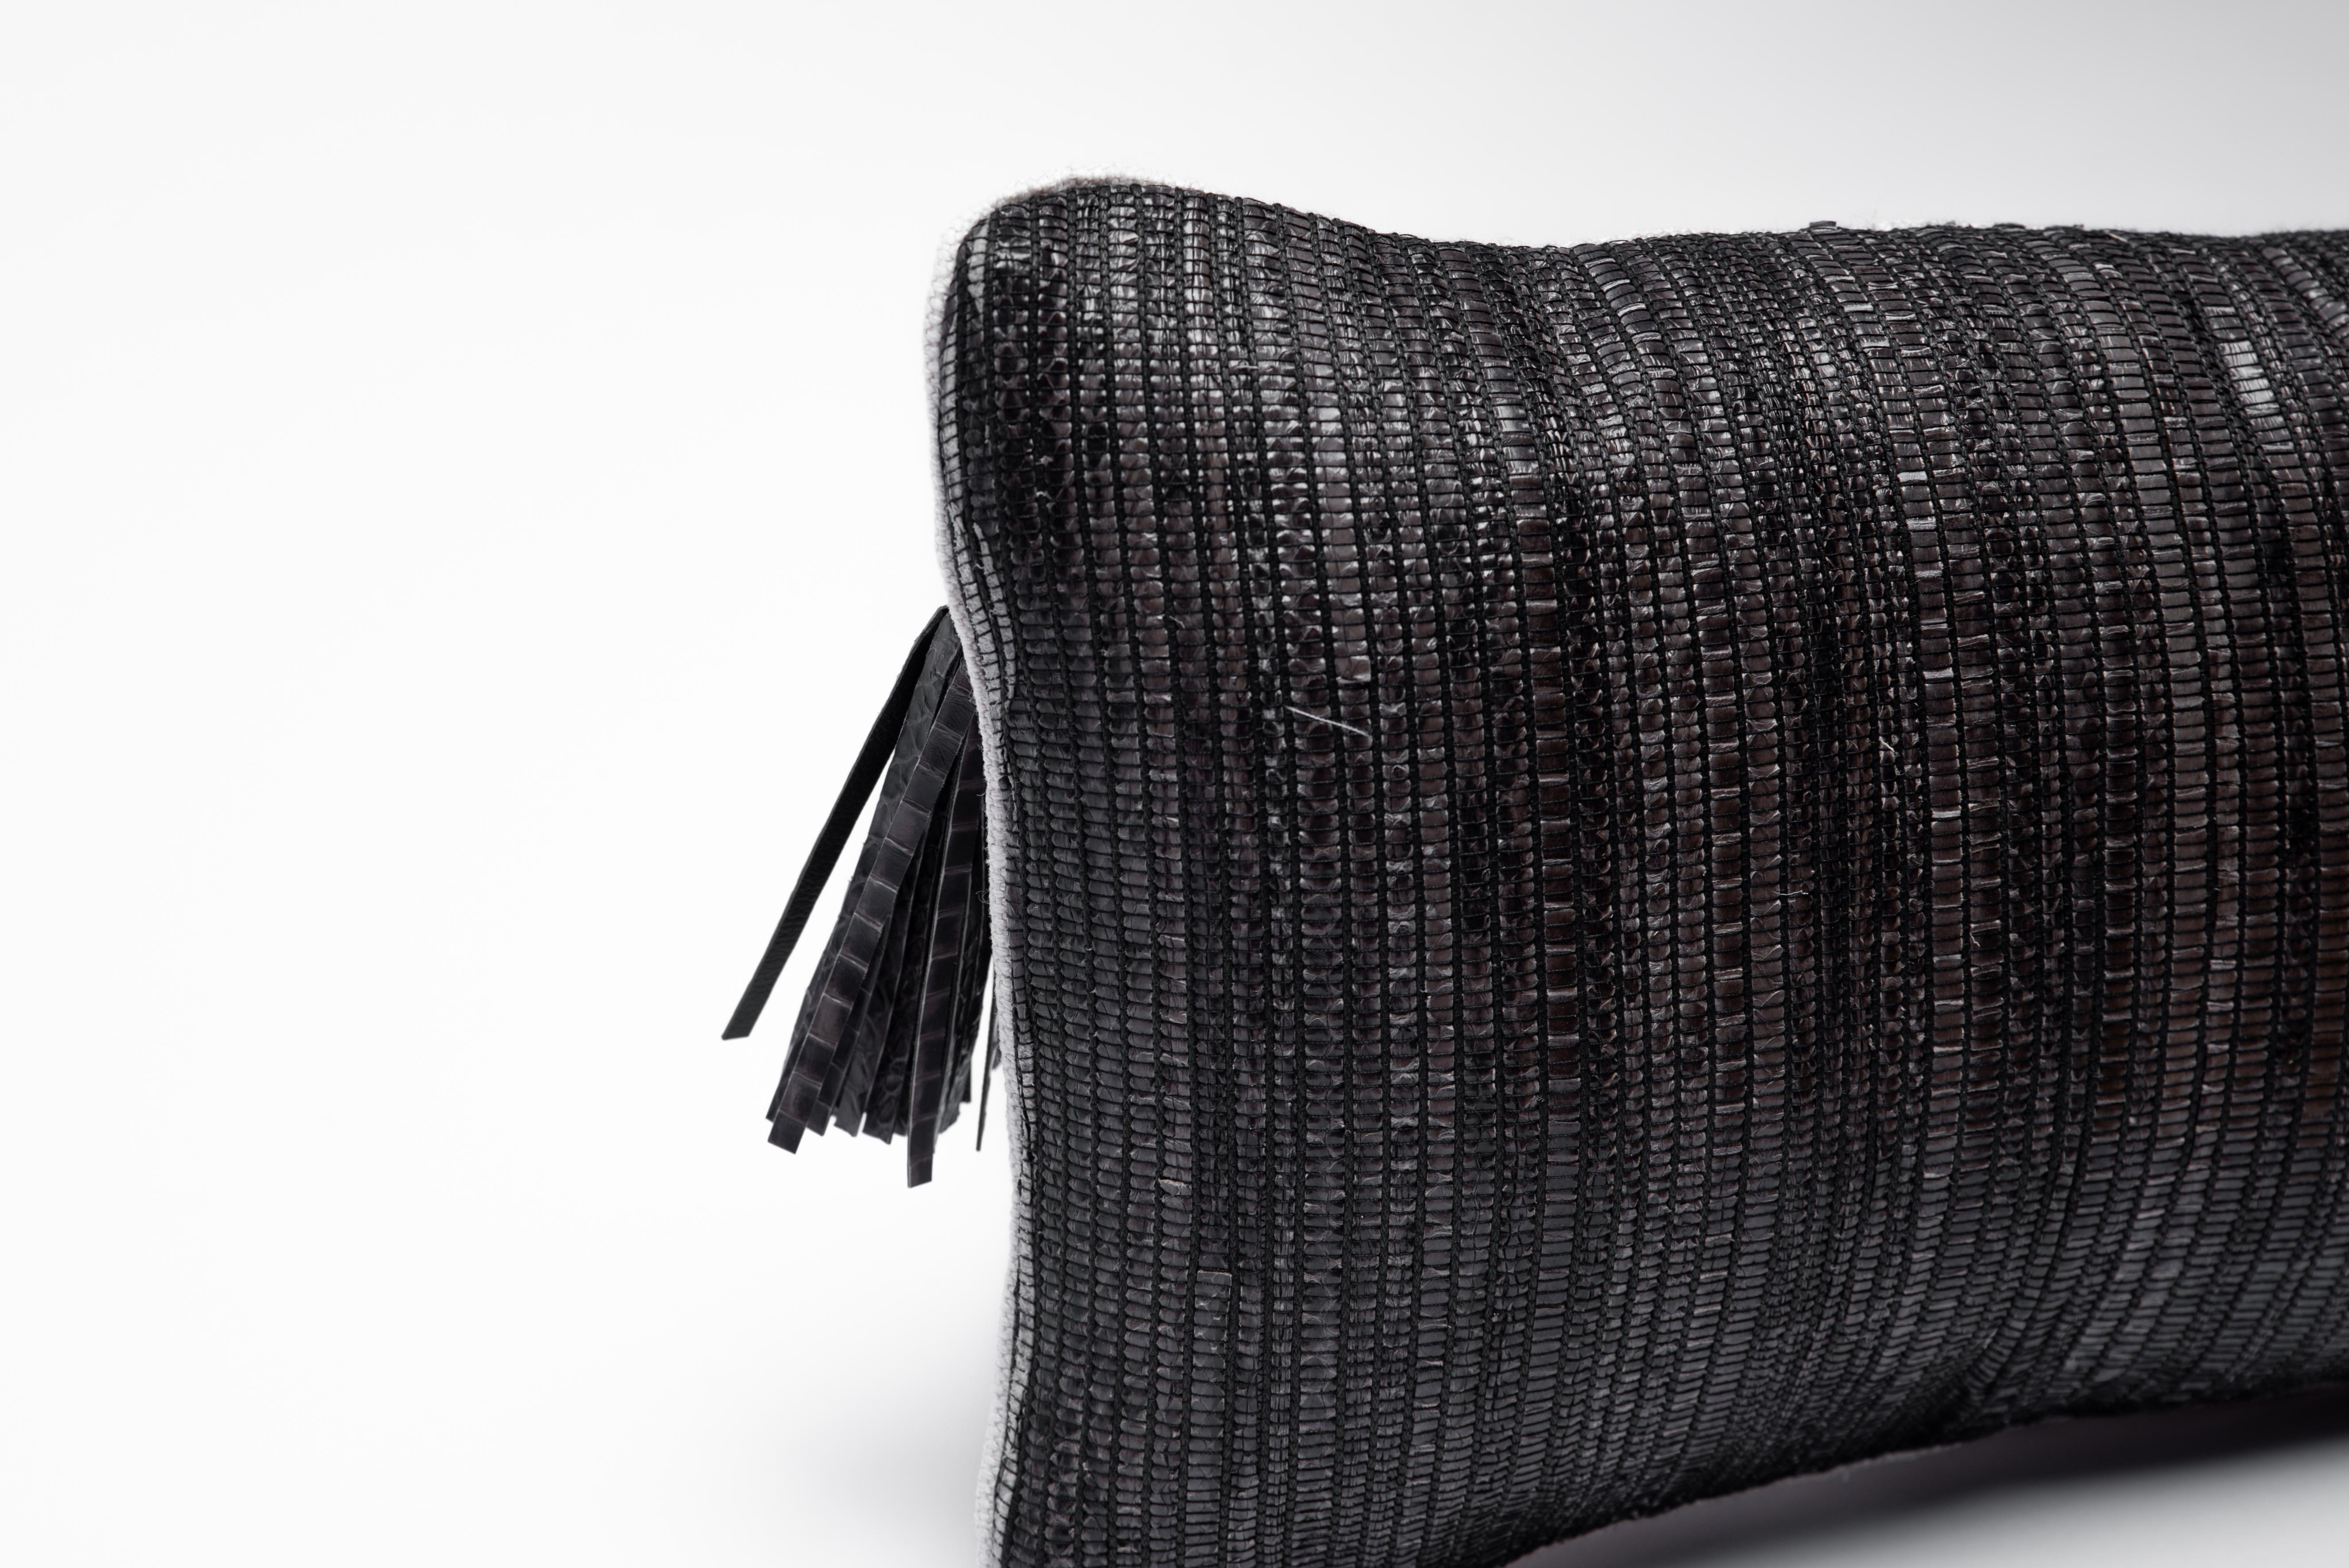 The woven snakeskin cushion by Kifu Paris is the ultimate luxury home textile piece. This textile is unique and original to the brand, who uses traditional weaving techniques with wooden looms to develop this supple and exotic textile. The back is